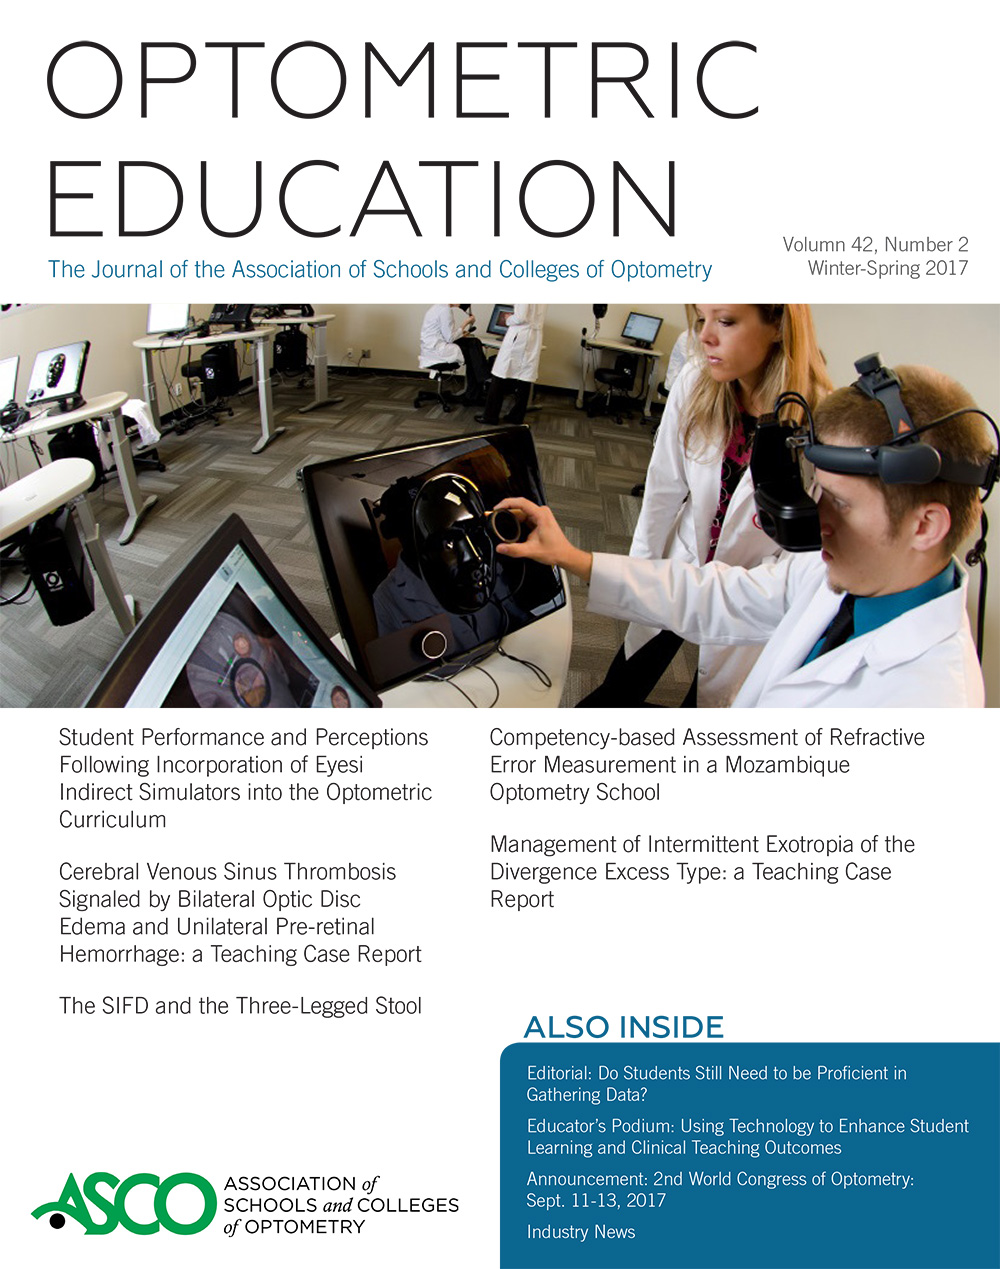 The Journal of Optometric Education.